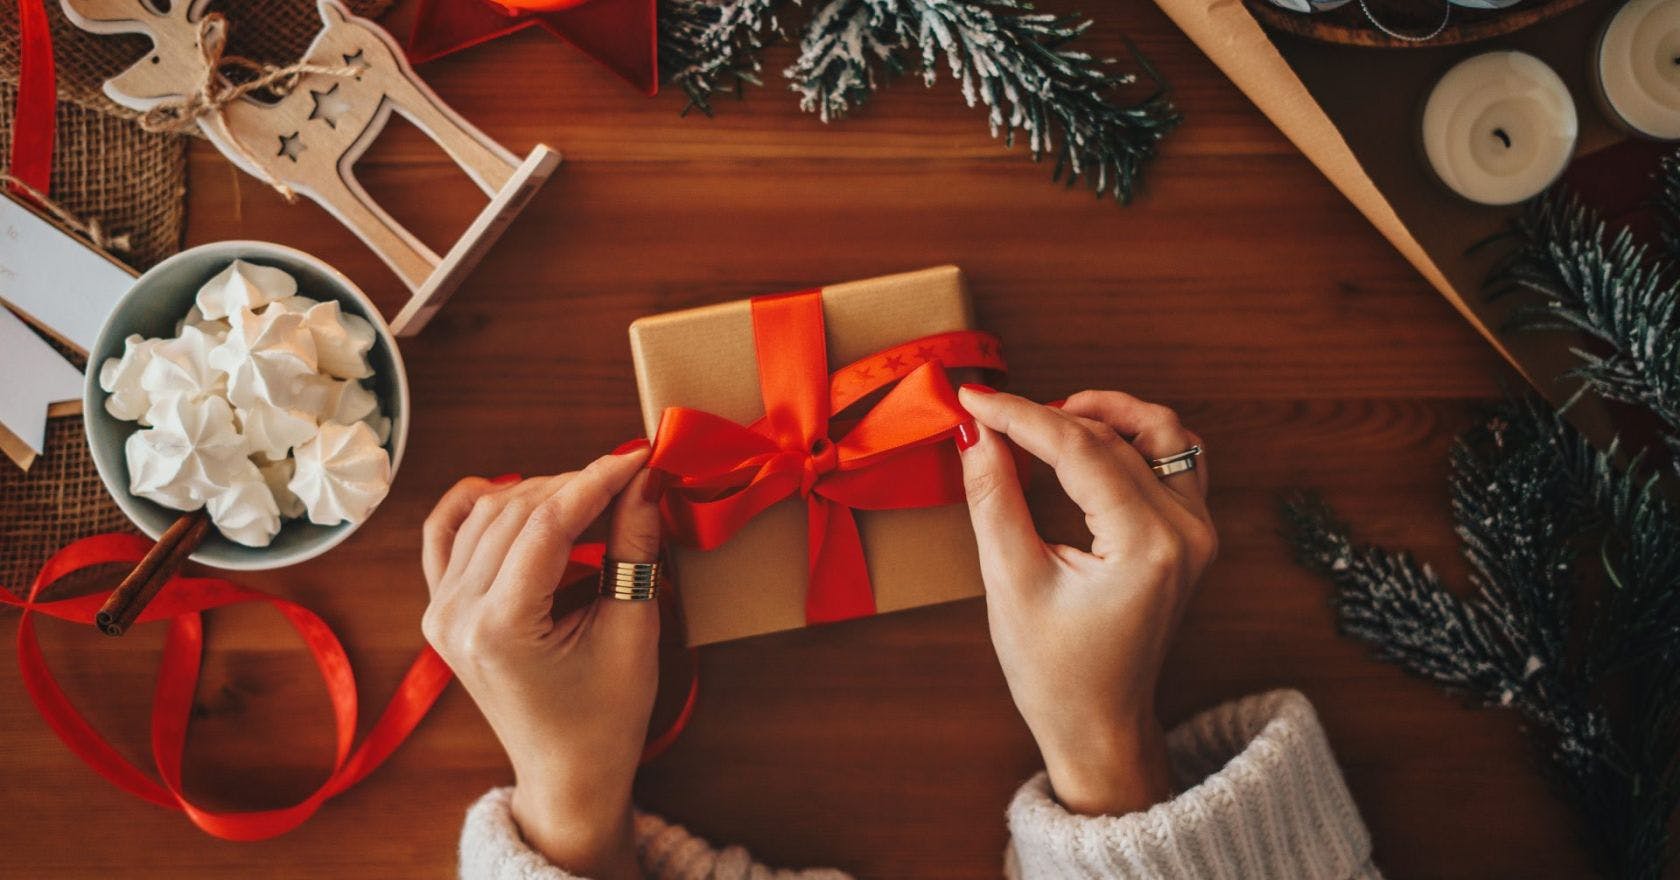 Christmas gift anxiety: this is why you should ask questions when deciding what to buy people for Christmas